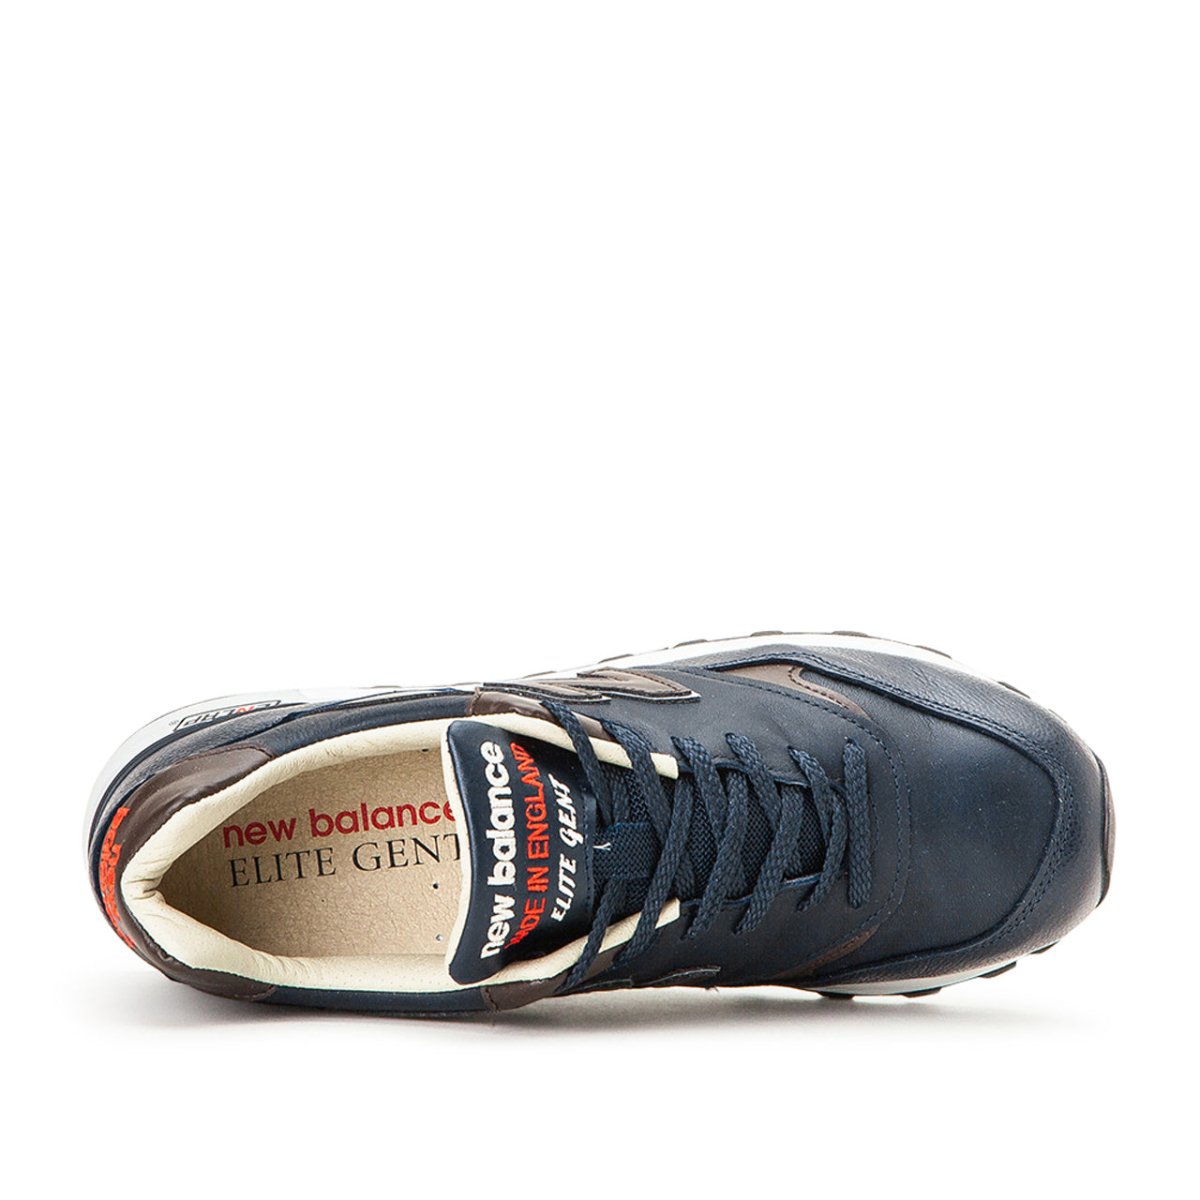 New Balance M577 GNB 'Elite Gent - Made in England' (Navy)  - Allike Store